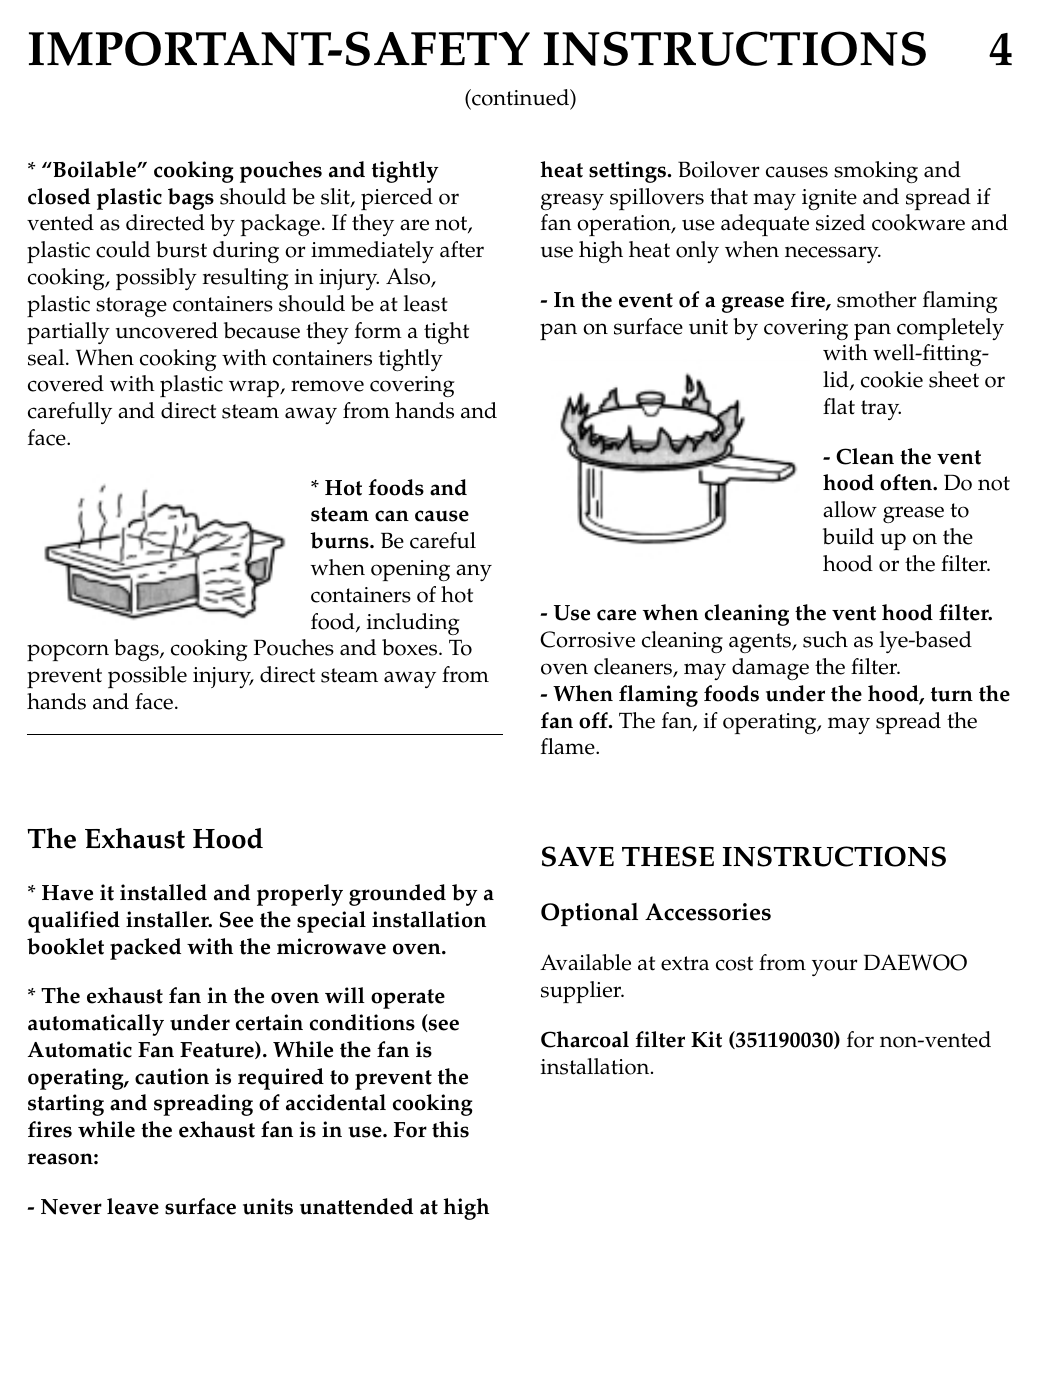 IMPORTANT-SAFETY INSTRUCTIONS 4* “Boilable” cooking pouches and tightlyclosed plastic bags should be slit, pierced orvented as directed by package. If they are not,plastic could burst during or immediately aftercooking, possibly resulting in injury. Also,plastic storage containers should be at leastpartially uncovered because they form a tightseal. When cooking with containers tightlycovered with plastic wrap, remove coveringcarefully and direct steam away from hands andface.* Hot foods andsteam can causeburns. Be carefulwhen opening anycontainers of hotfood, includingpopcorn bags, cooking Pouches and boxes. Toprevent possible injury, direct steam away fromhands and face.The Exhaust Hood* Have it installed and properly grounded by aqualified installer. See the special installationbooklet packed with the microwave oven.* The exhaust fan in the oven will operateautomatically under certain conditions (seeAutomatic Fan Feature). While the fan isoperating, caution is required to prevent thestarting and spreading of accidental cookingfires while the exhaust fan is in use. For thisreason:- Never leave surface units unattended at highheat settings. Boilover causes smoking andgreasy spillovers that may ignite and spread iffan operation, use adequate sized cookware anduse high heat only when necessary.- In the event of a grease fire, smother flamingpan on surface unit by covering pan completelywith well-fitting-lid, cookie sheet orflat tray.- Clean the venthood often. Do notallow grease tobuild up on thehood or the filter.- Use care when cleaning the vent hood filter.Corrosive cleaning agents, such as lye-basedoven cleaners, may damage the filter.- When flaming foods under the hood, turn thefan off. The fan, if operating, may spread theflame.SAVE THESE INSTRUCTIONSOptional AccessoriesAvailable at extra cost from your DAEWOOsupplier.Charcoal filter Kit (351190030) for non-ventedinstallation.(continued)